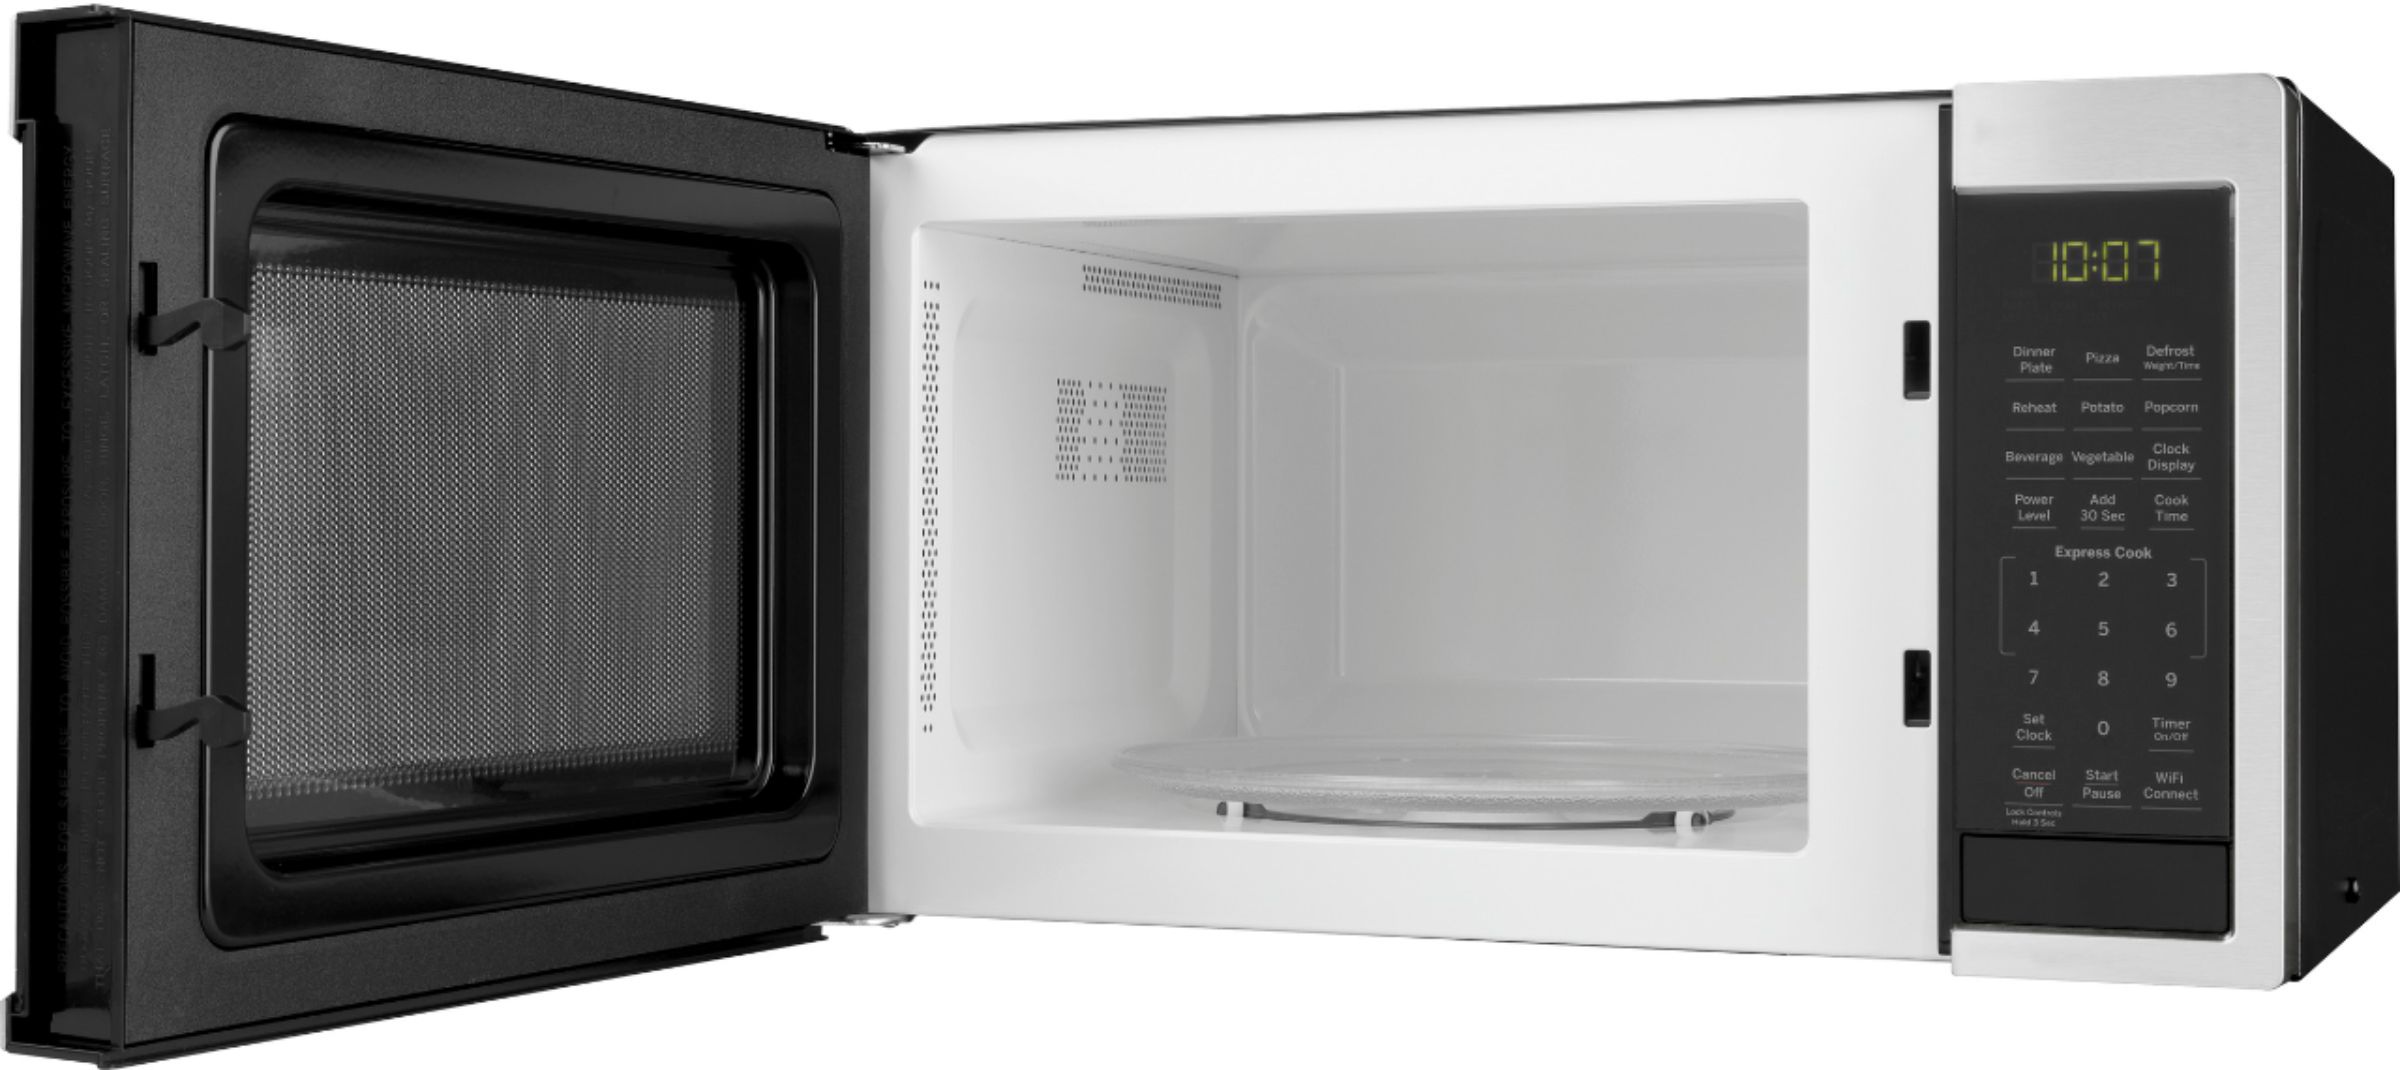 GE 0.9 Cu. Ft. Capacity Smart Countertop Microwave Oven with Scan-to-Cook  Technology Stainless Steel JES1097SMSS - Best Buy